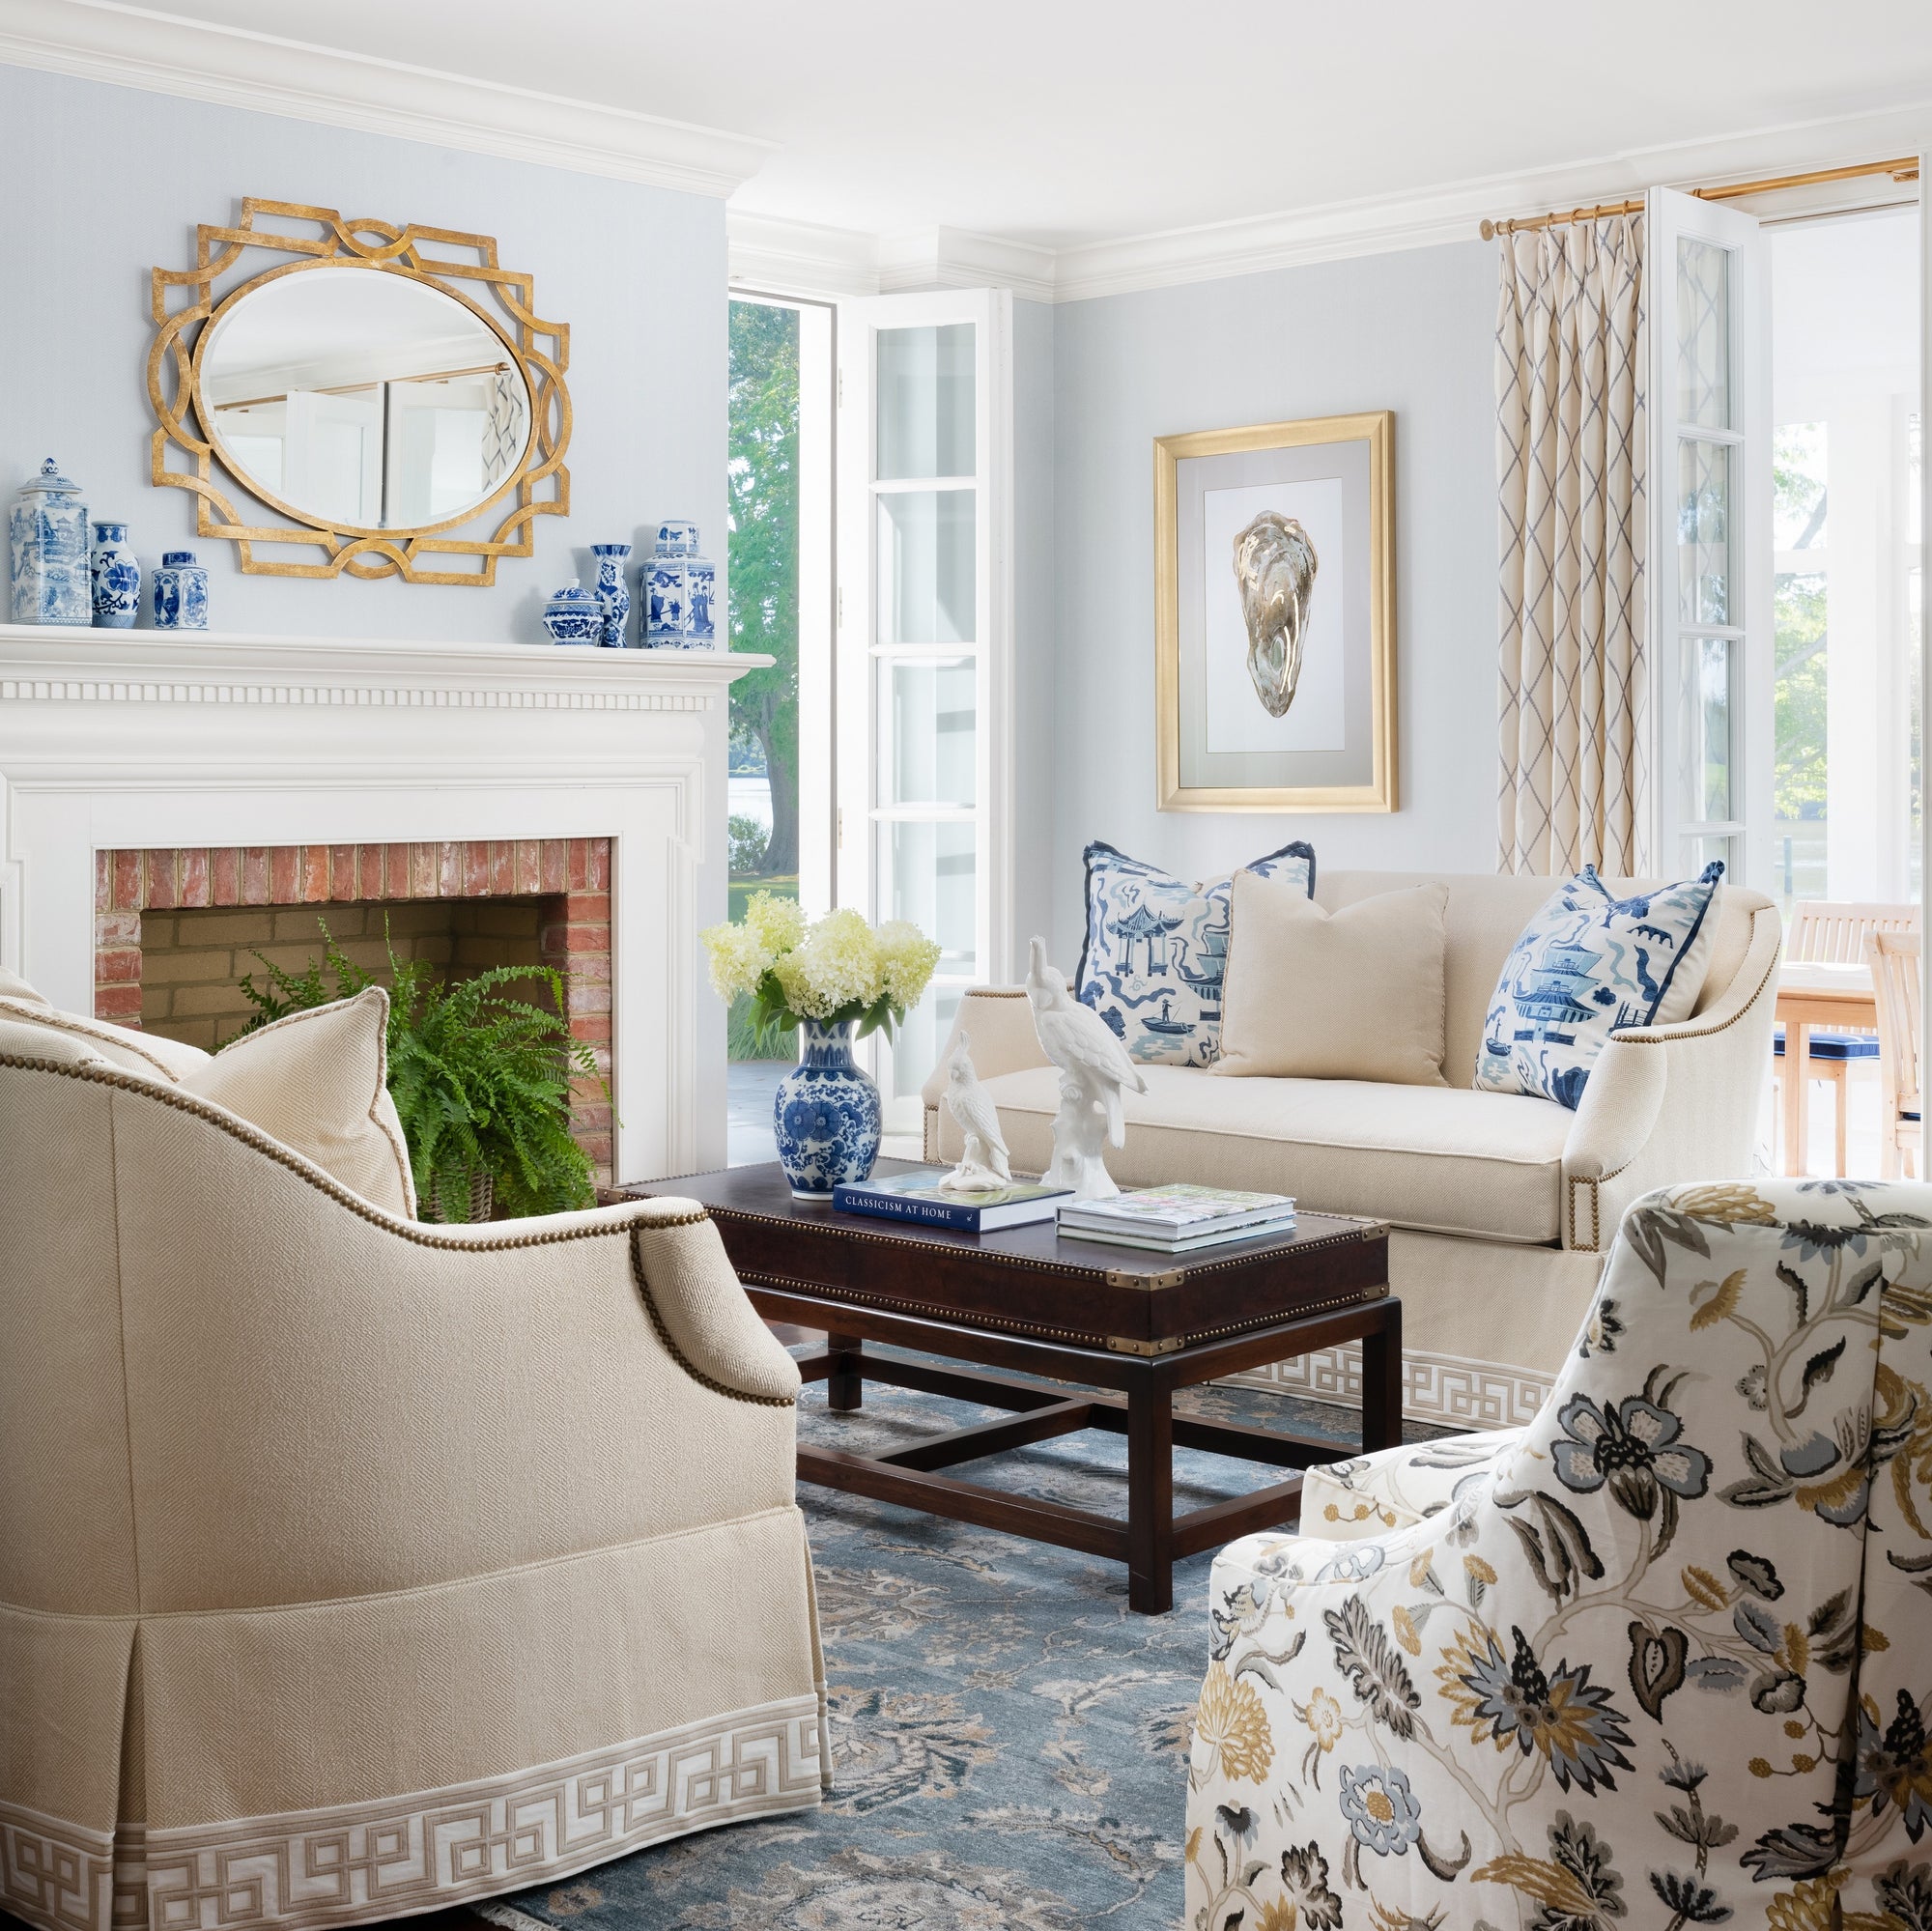 Decorating with blue and white: how to use this classic mix